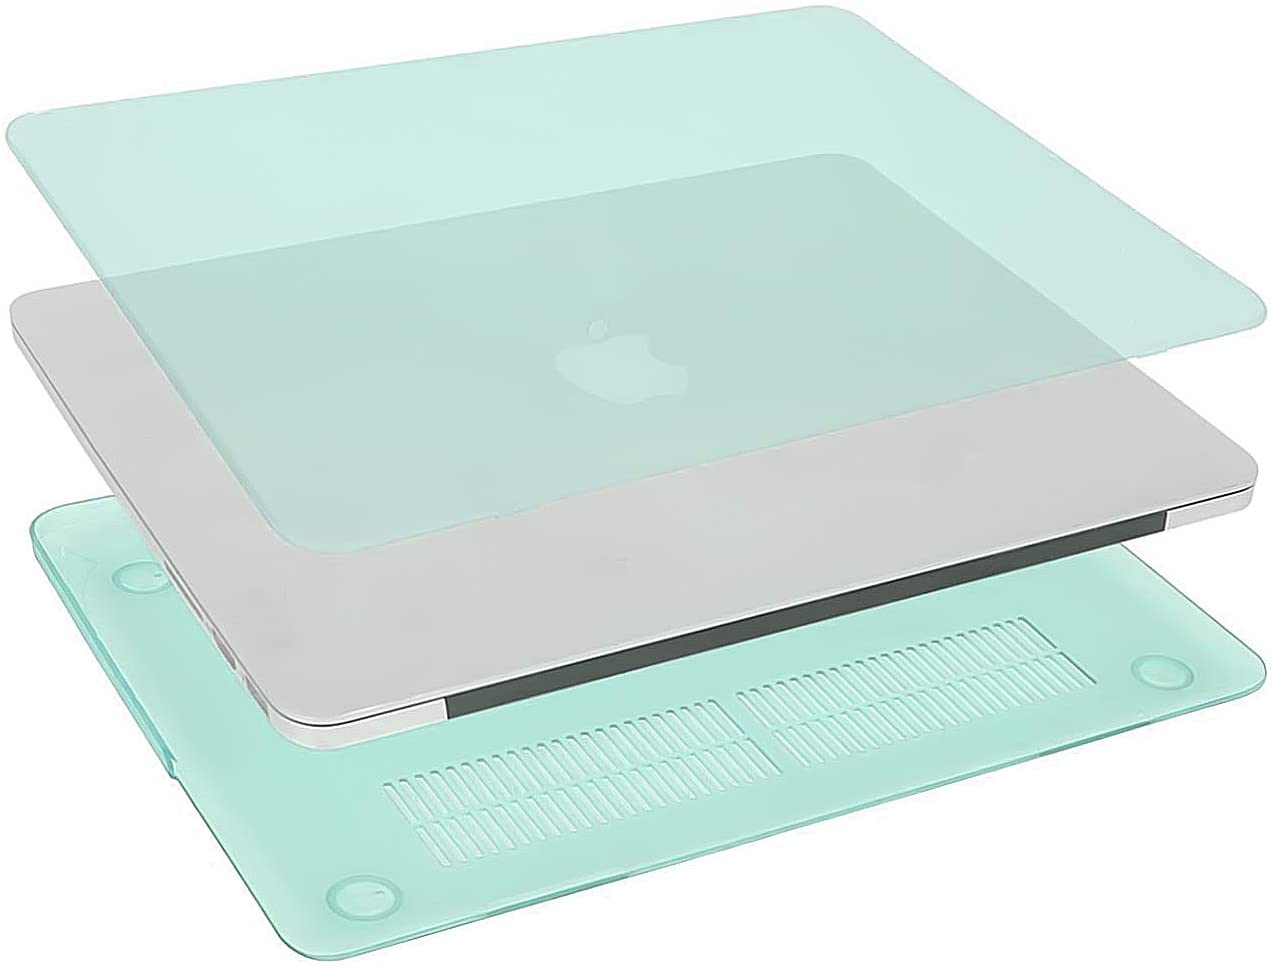 Clear Green -   MacBook Pro 15 inch 2012-2015 & 16 inch  2019 - 2020 . Hard case, keyboard and screen protector. - e4cents